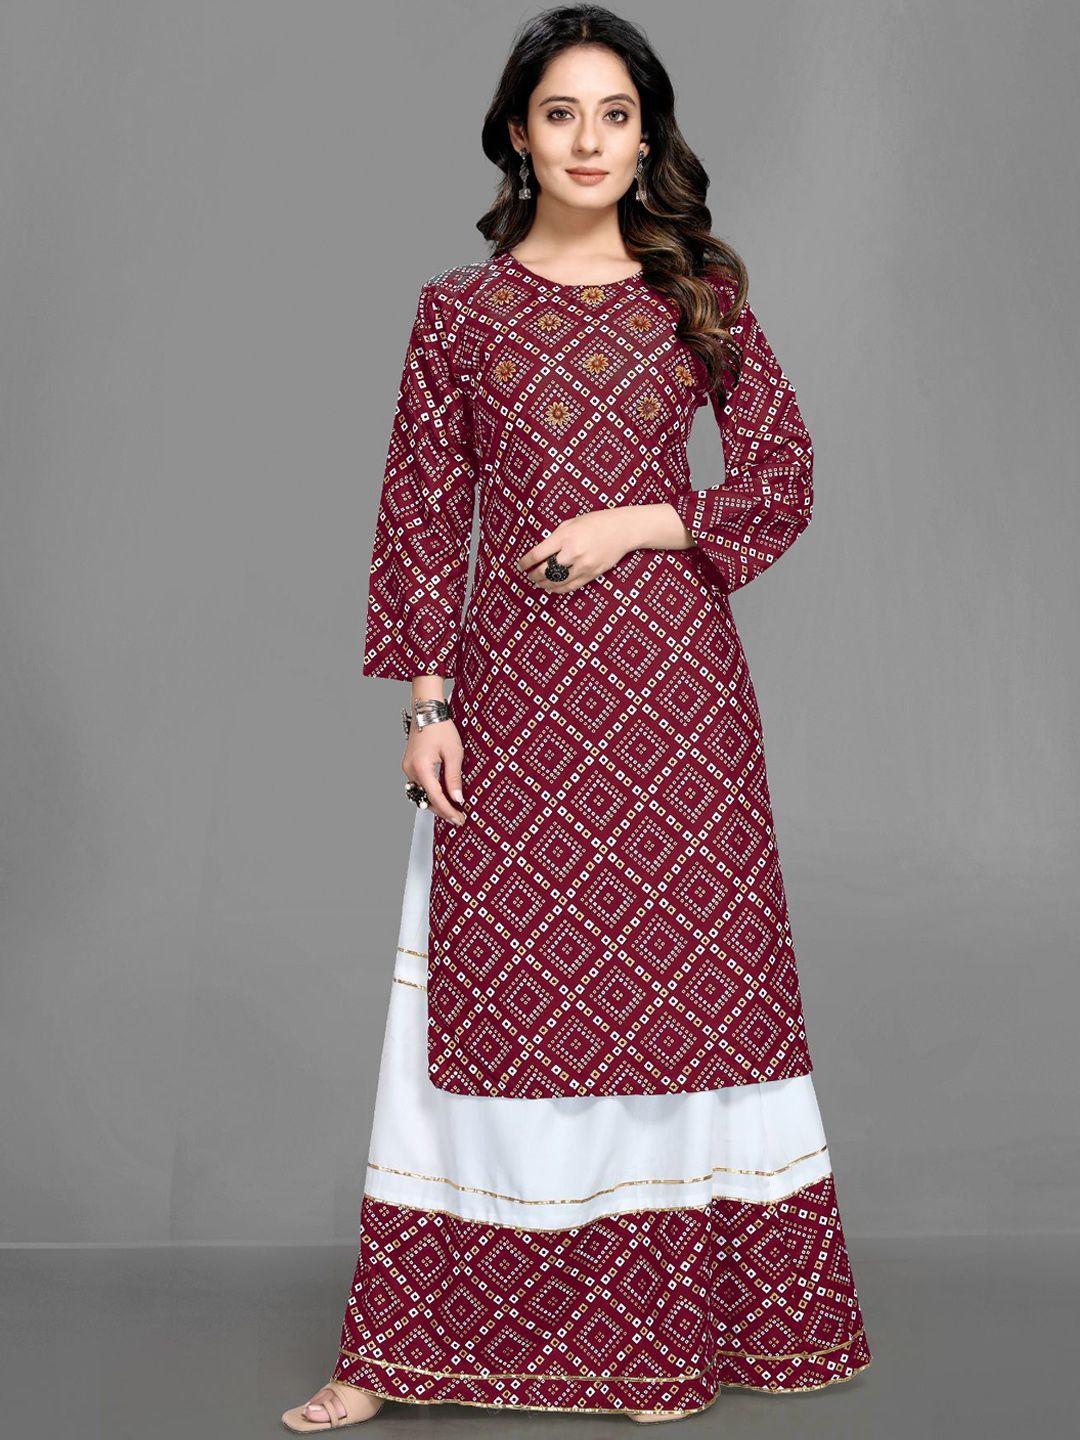 queenswear-creation-women-maroon-ethnic-motifs-printed-beads-and-stones-pure-cotton-kurta-with-skirt